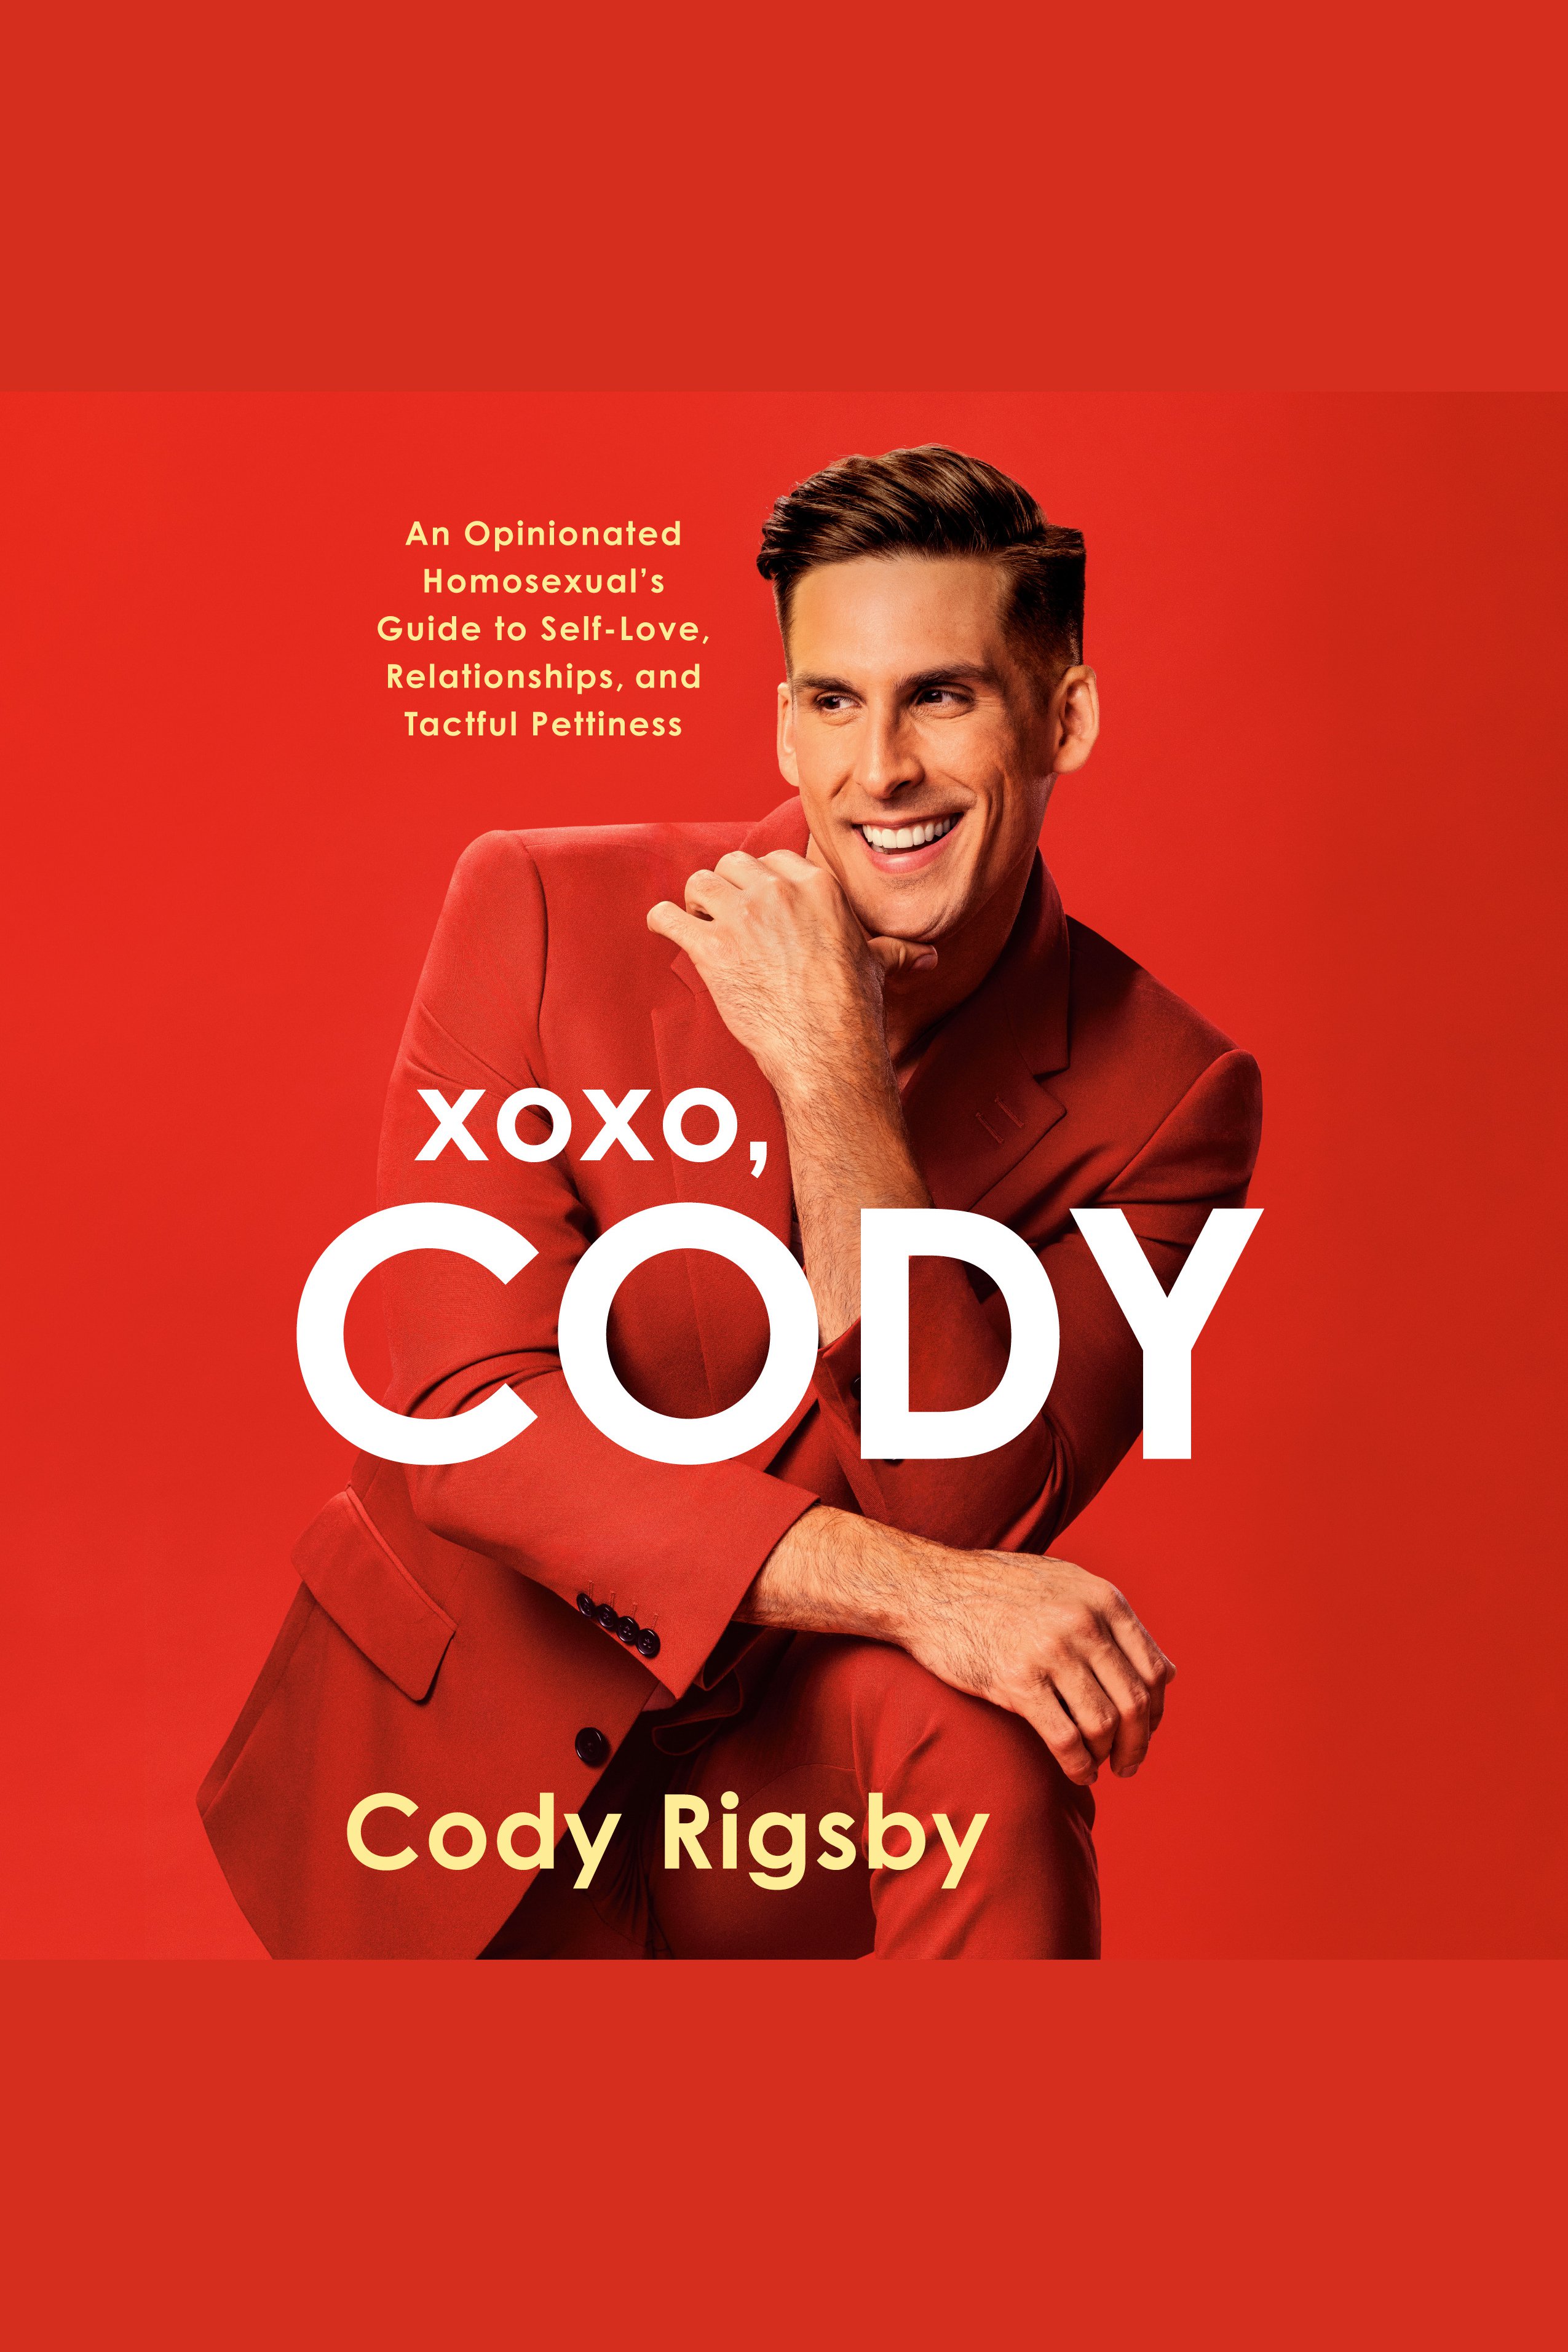 XOXO, Cody An Opinionated Homosexual's Guide to Self-Love, Relationships, and Tactful Pettiness cover image